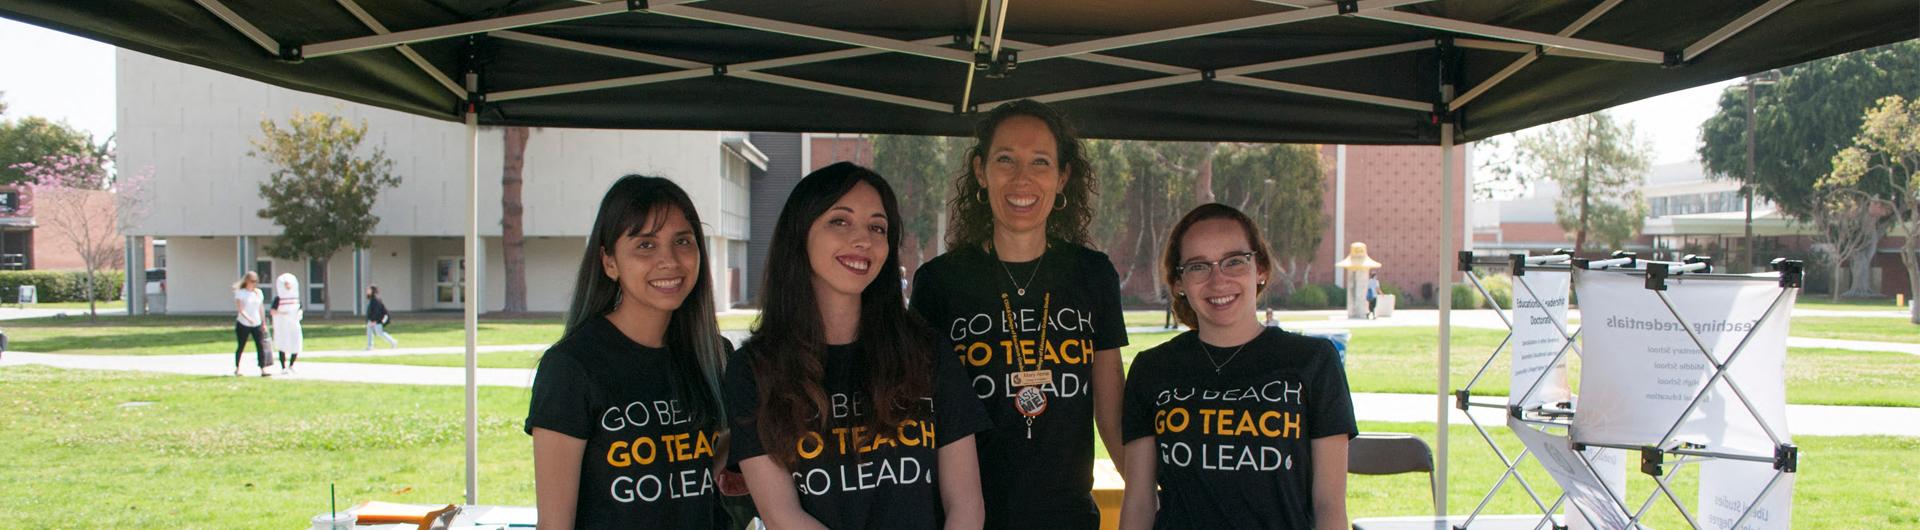 College of Education Staff and Student Ambassadors at the Ed Week Info Booth